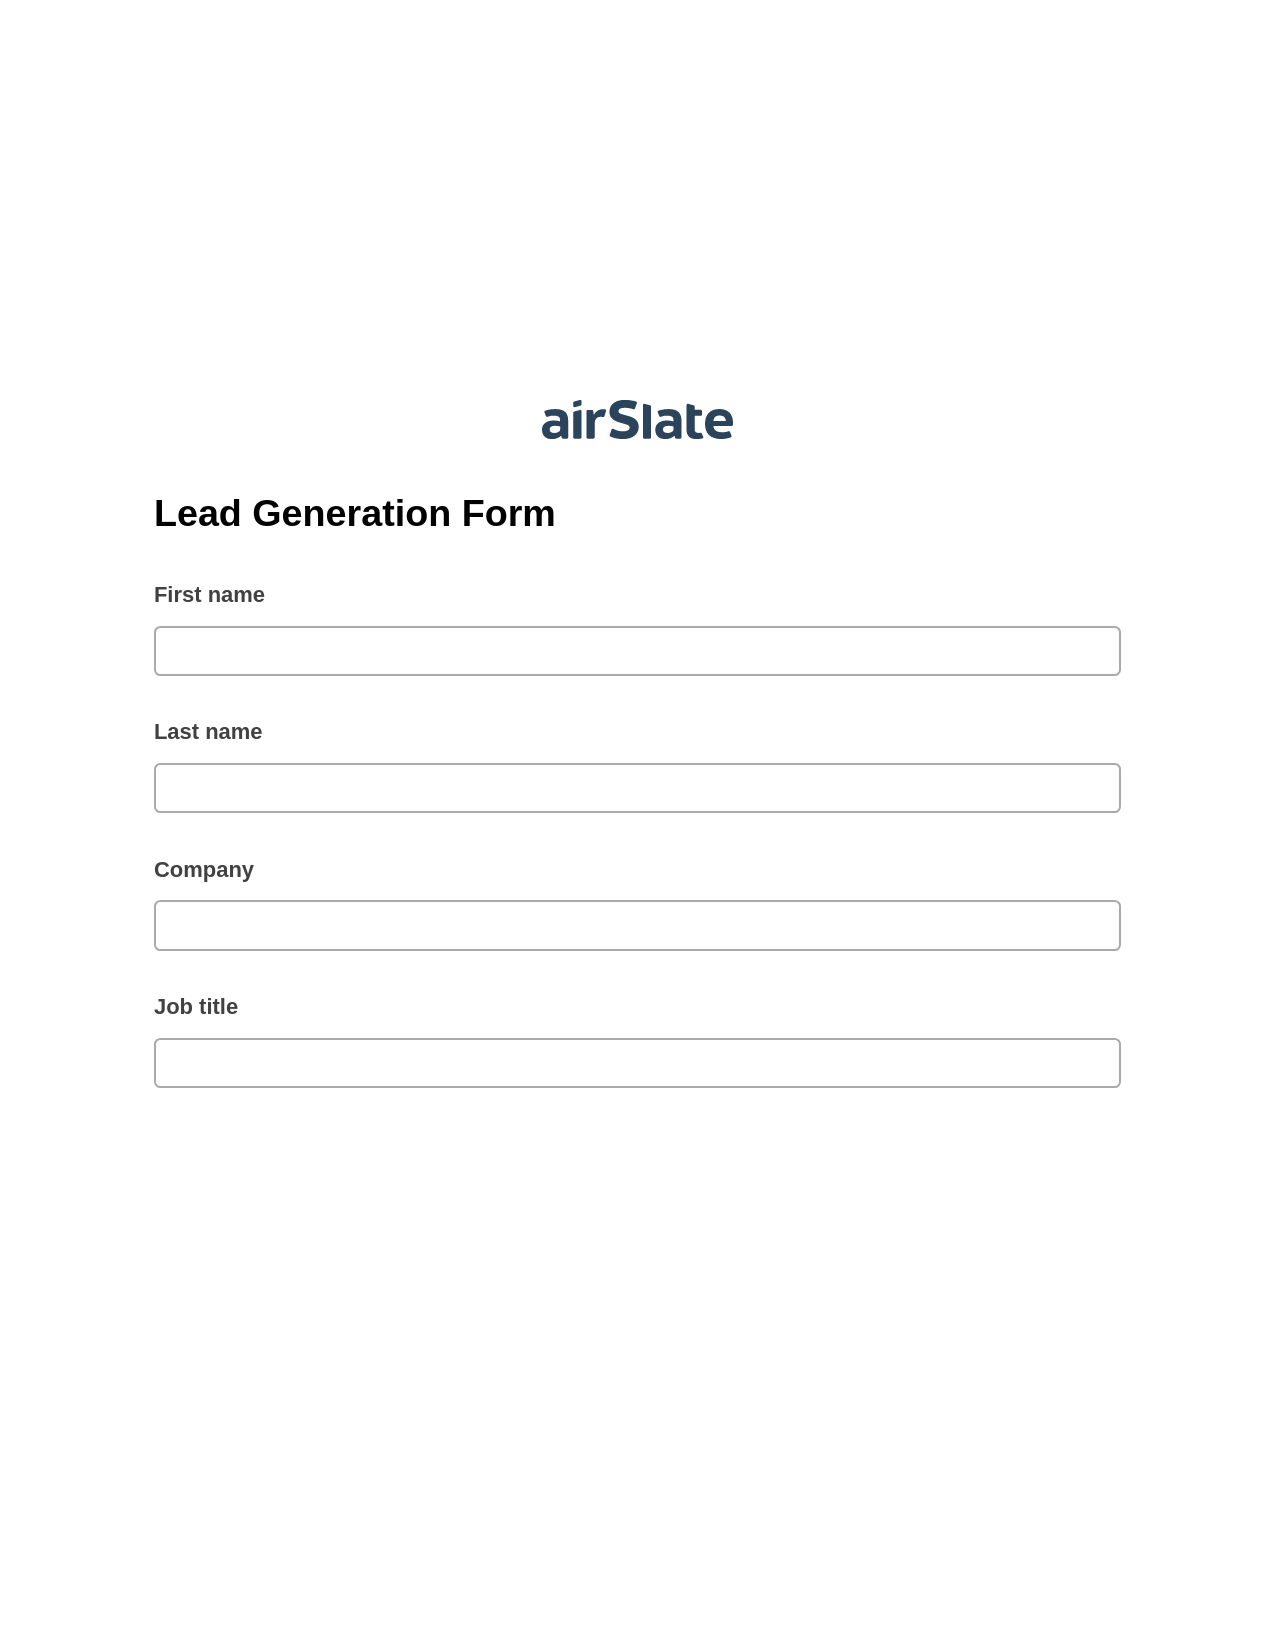 Lead Generation Form Pre-fill Dropdowns from Excel Bot, Send a Slate to Salesforce Contact Bot, Archive to OneDrive Bot